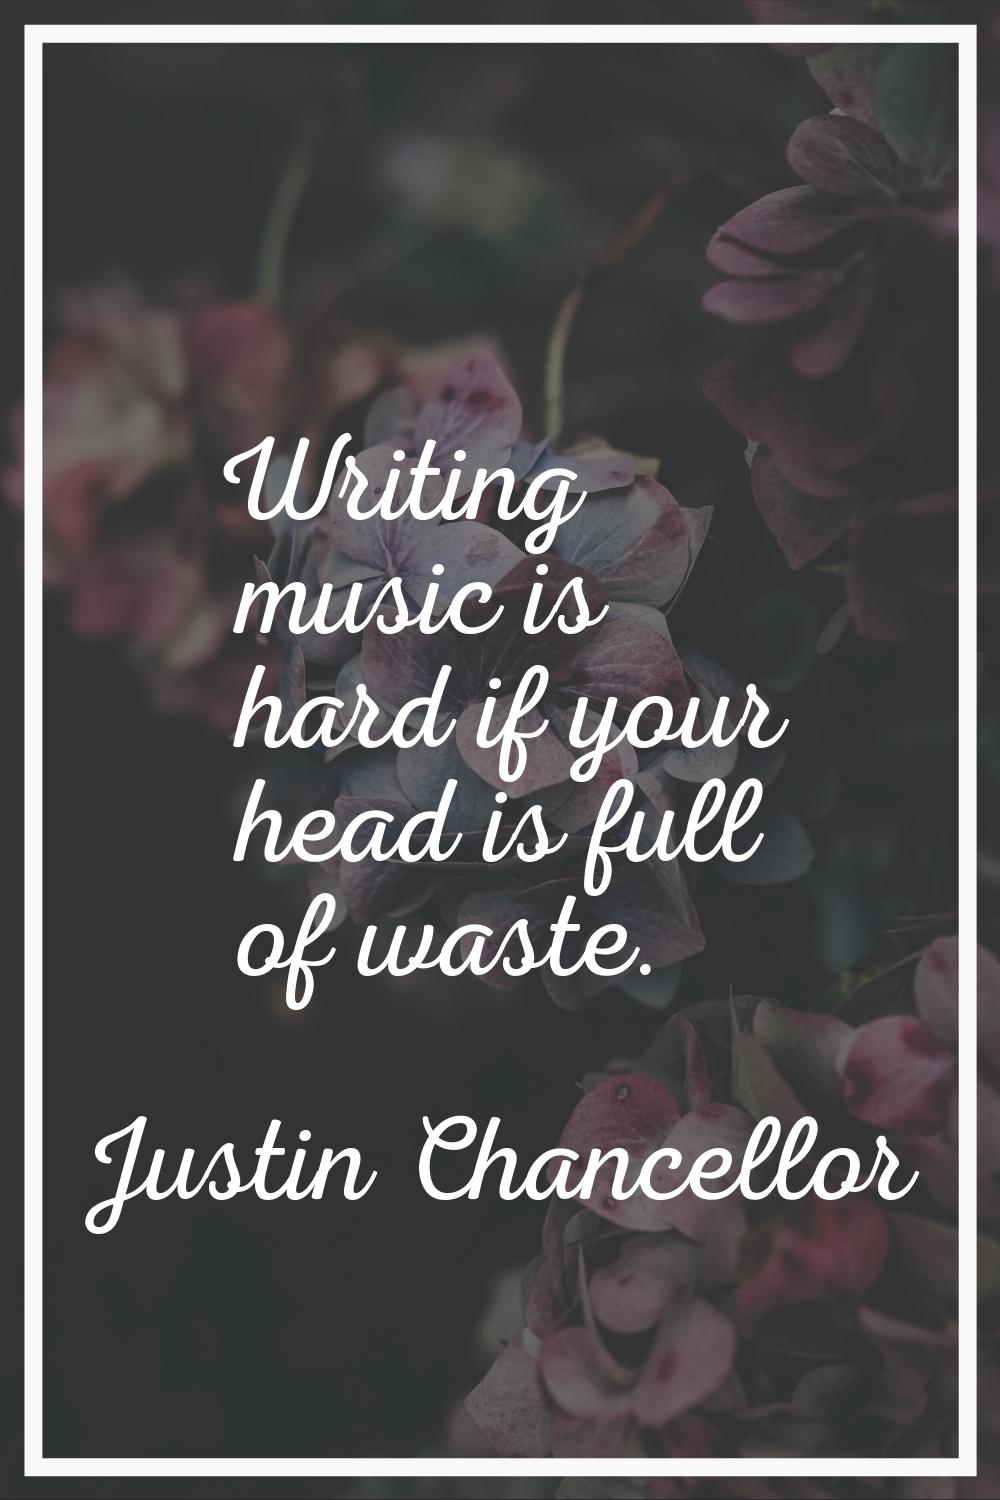 Writing music is hard if your head is full of waste.